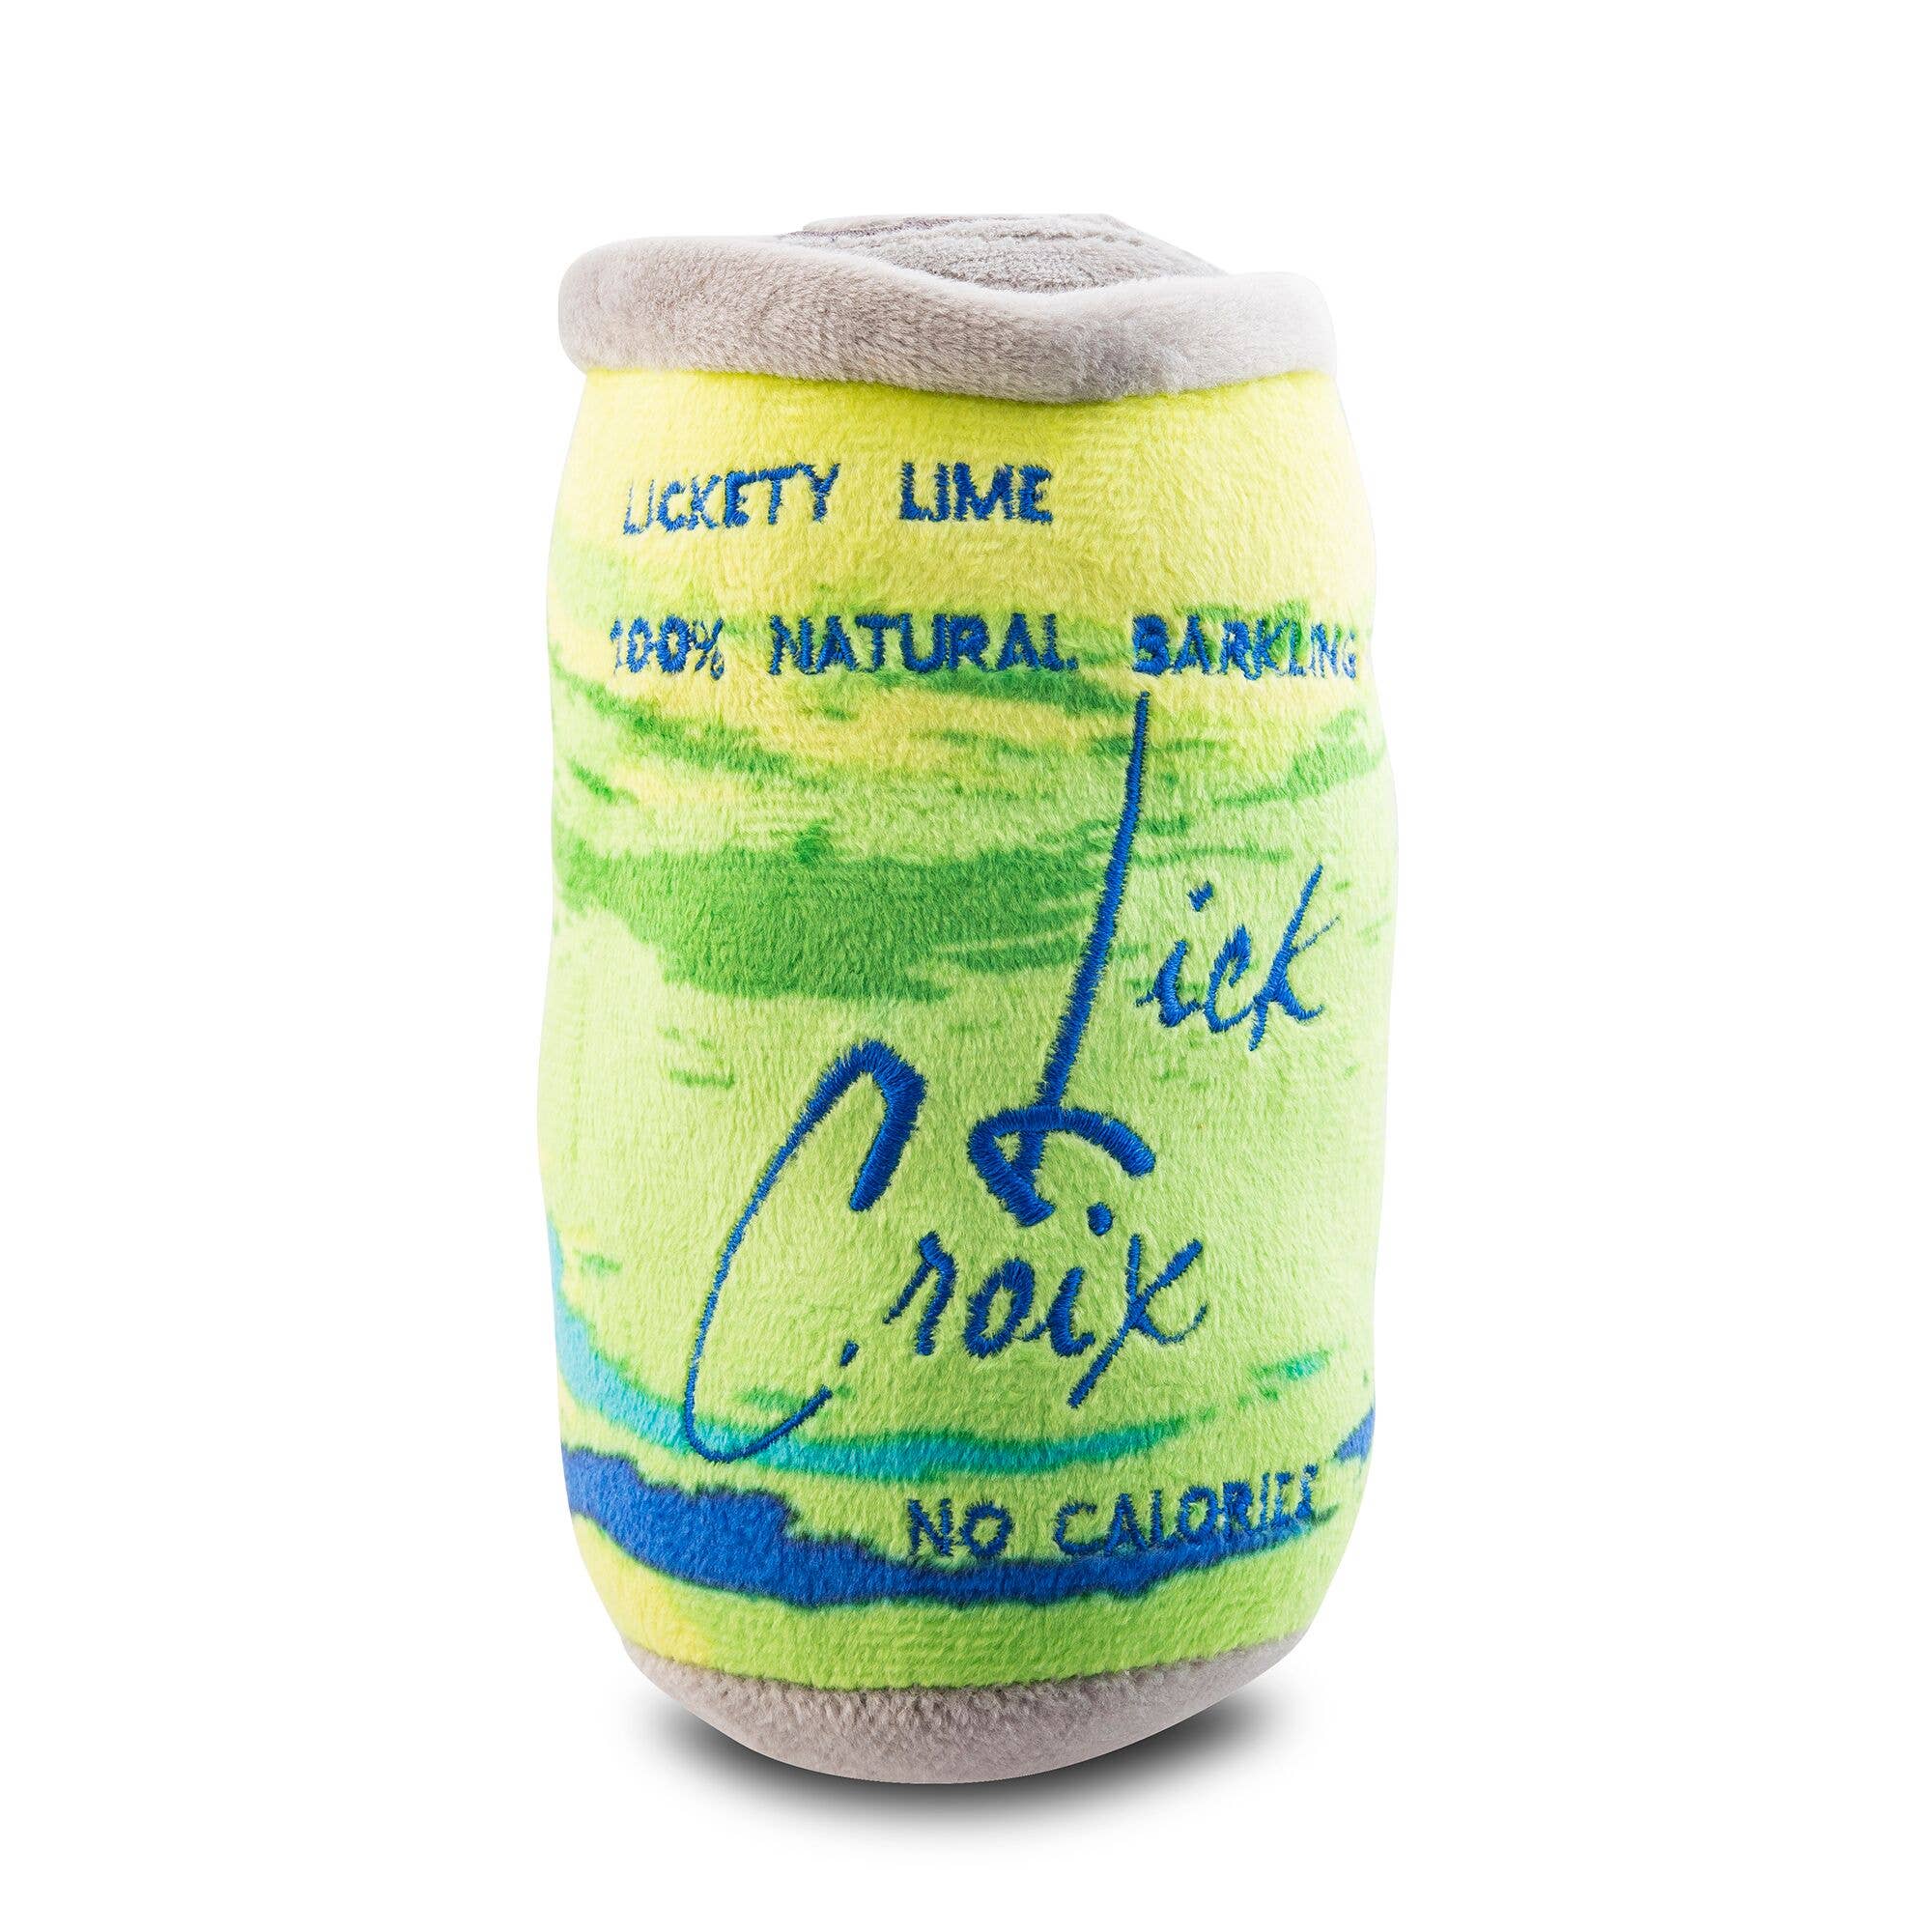 Haute Diggity Dog - LickCroix Lickety Lime Barkling Water